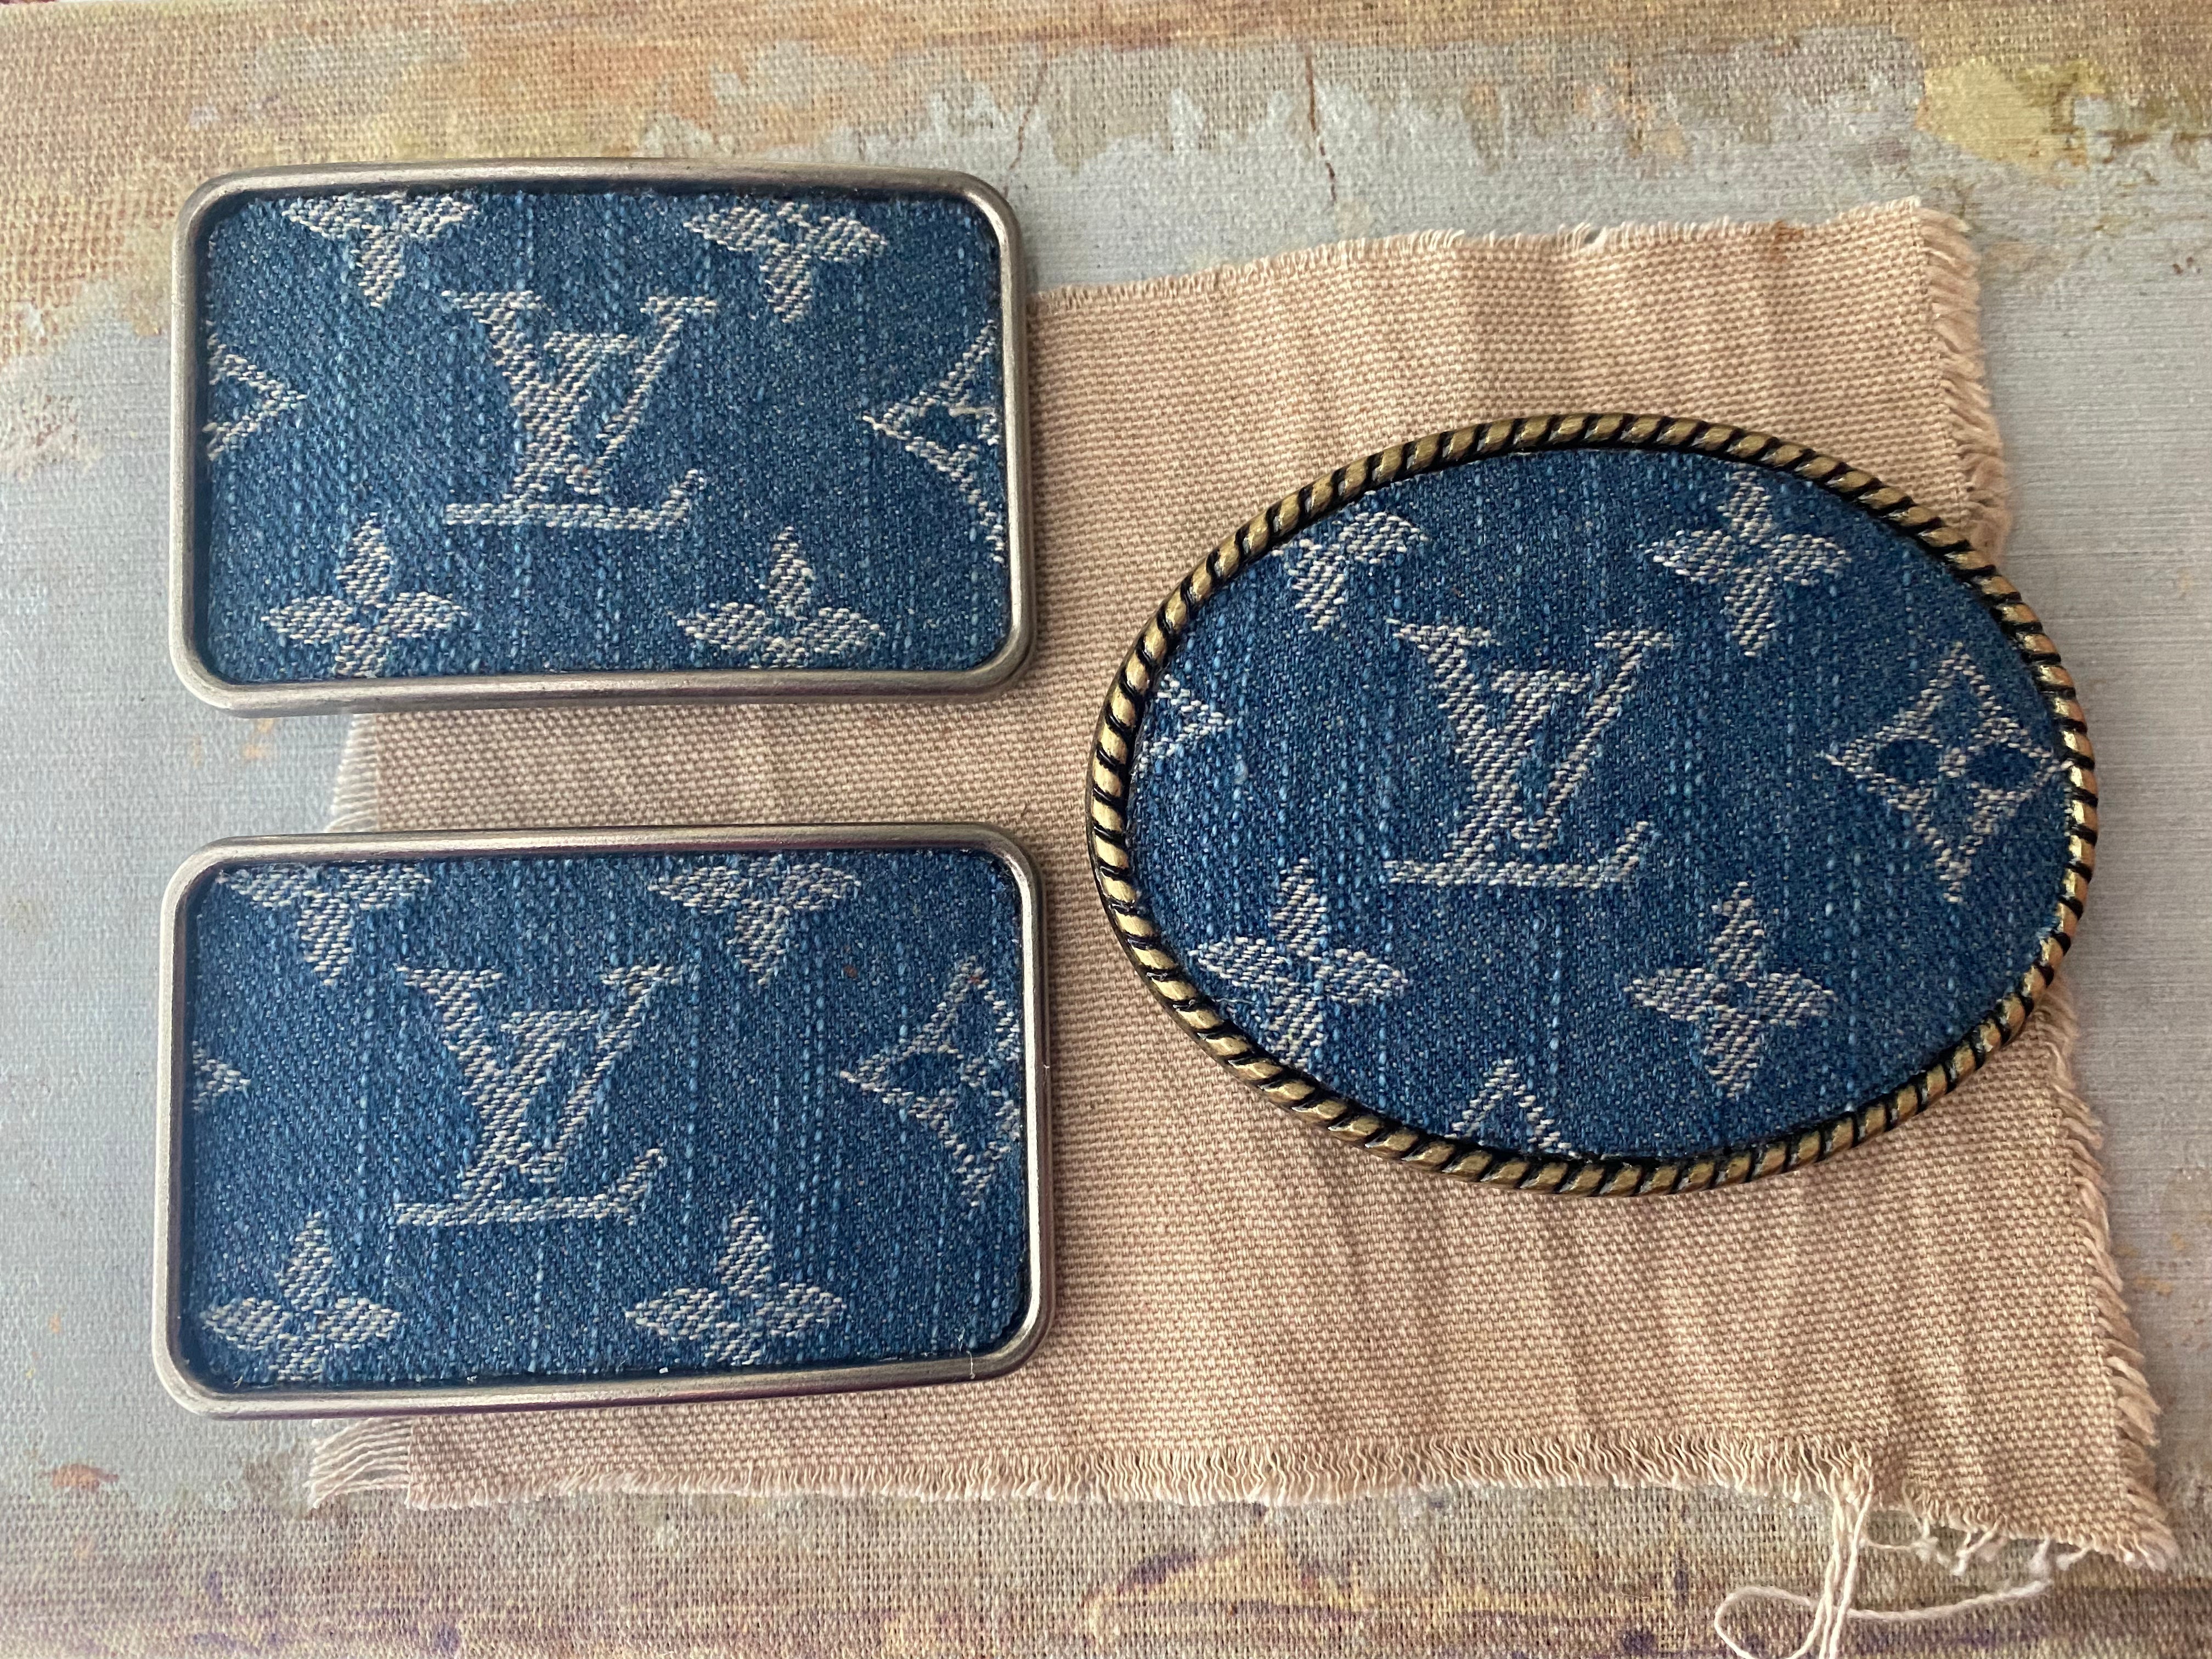 Upcycled LV coin purse - Repurposed Louis Vuitton - Louis Vuitton